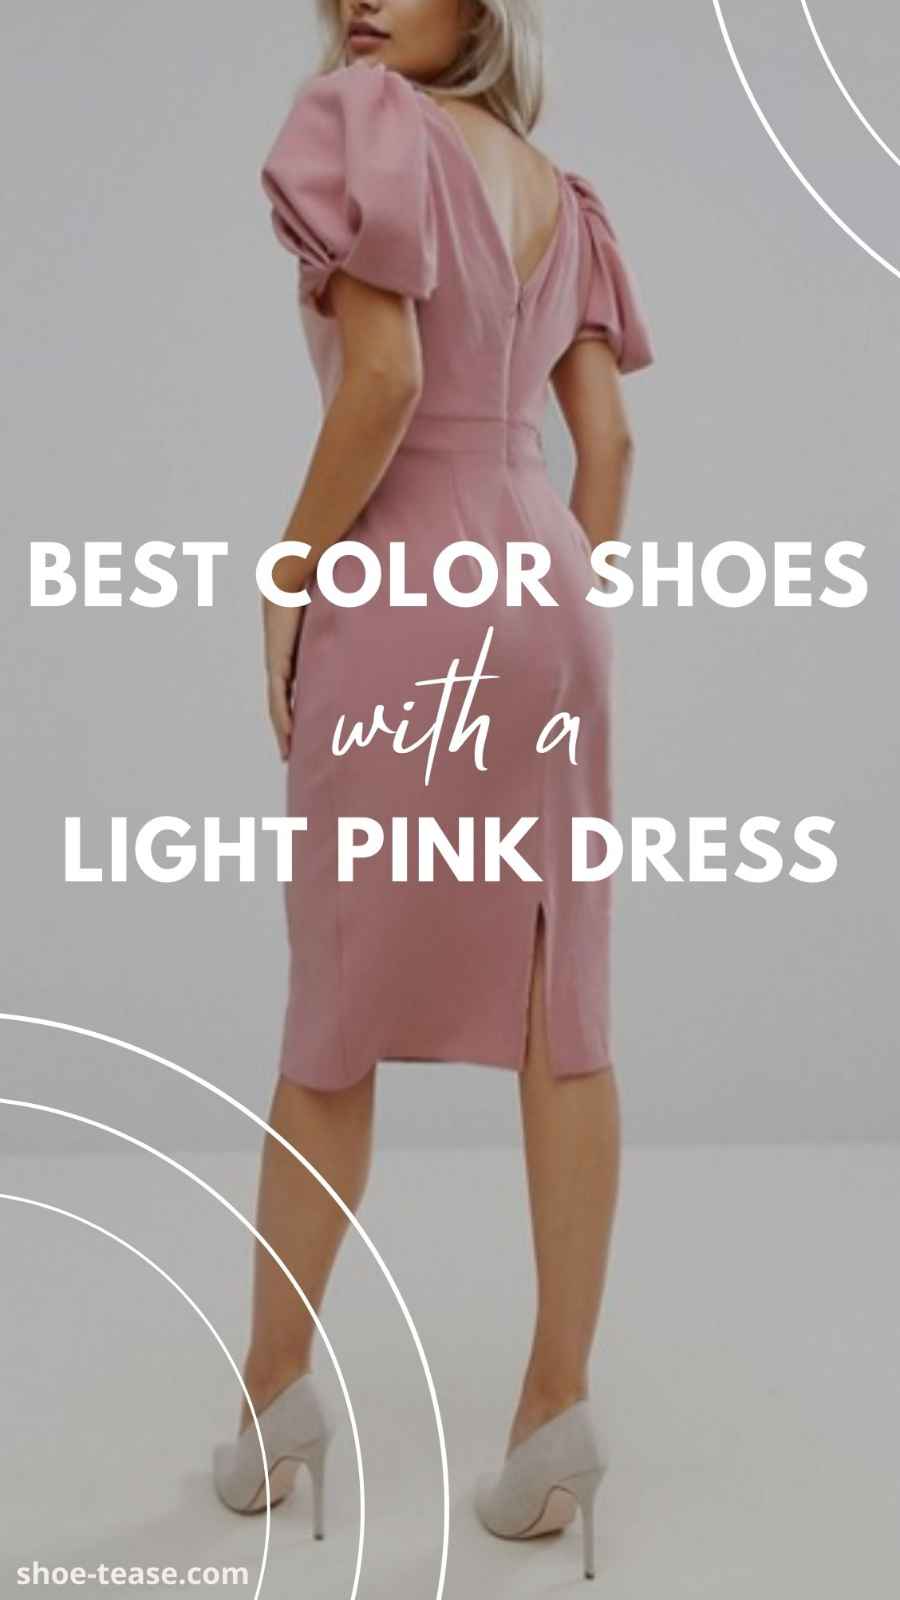 Shoes to Wear with Blush Dress Pin